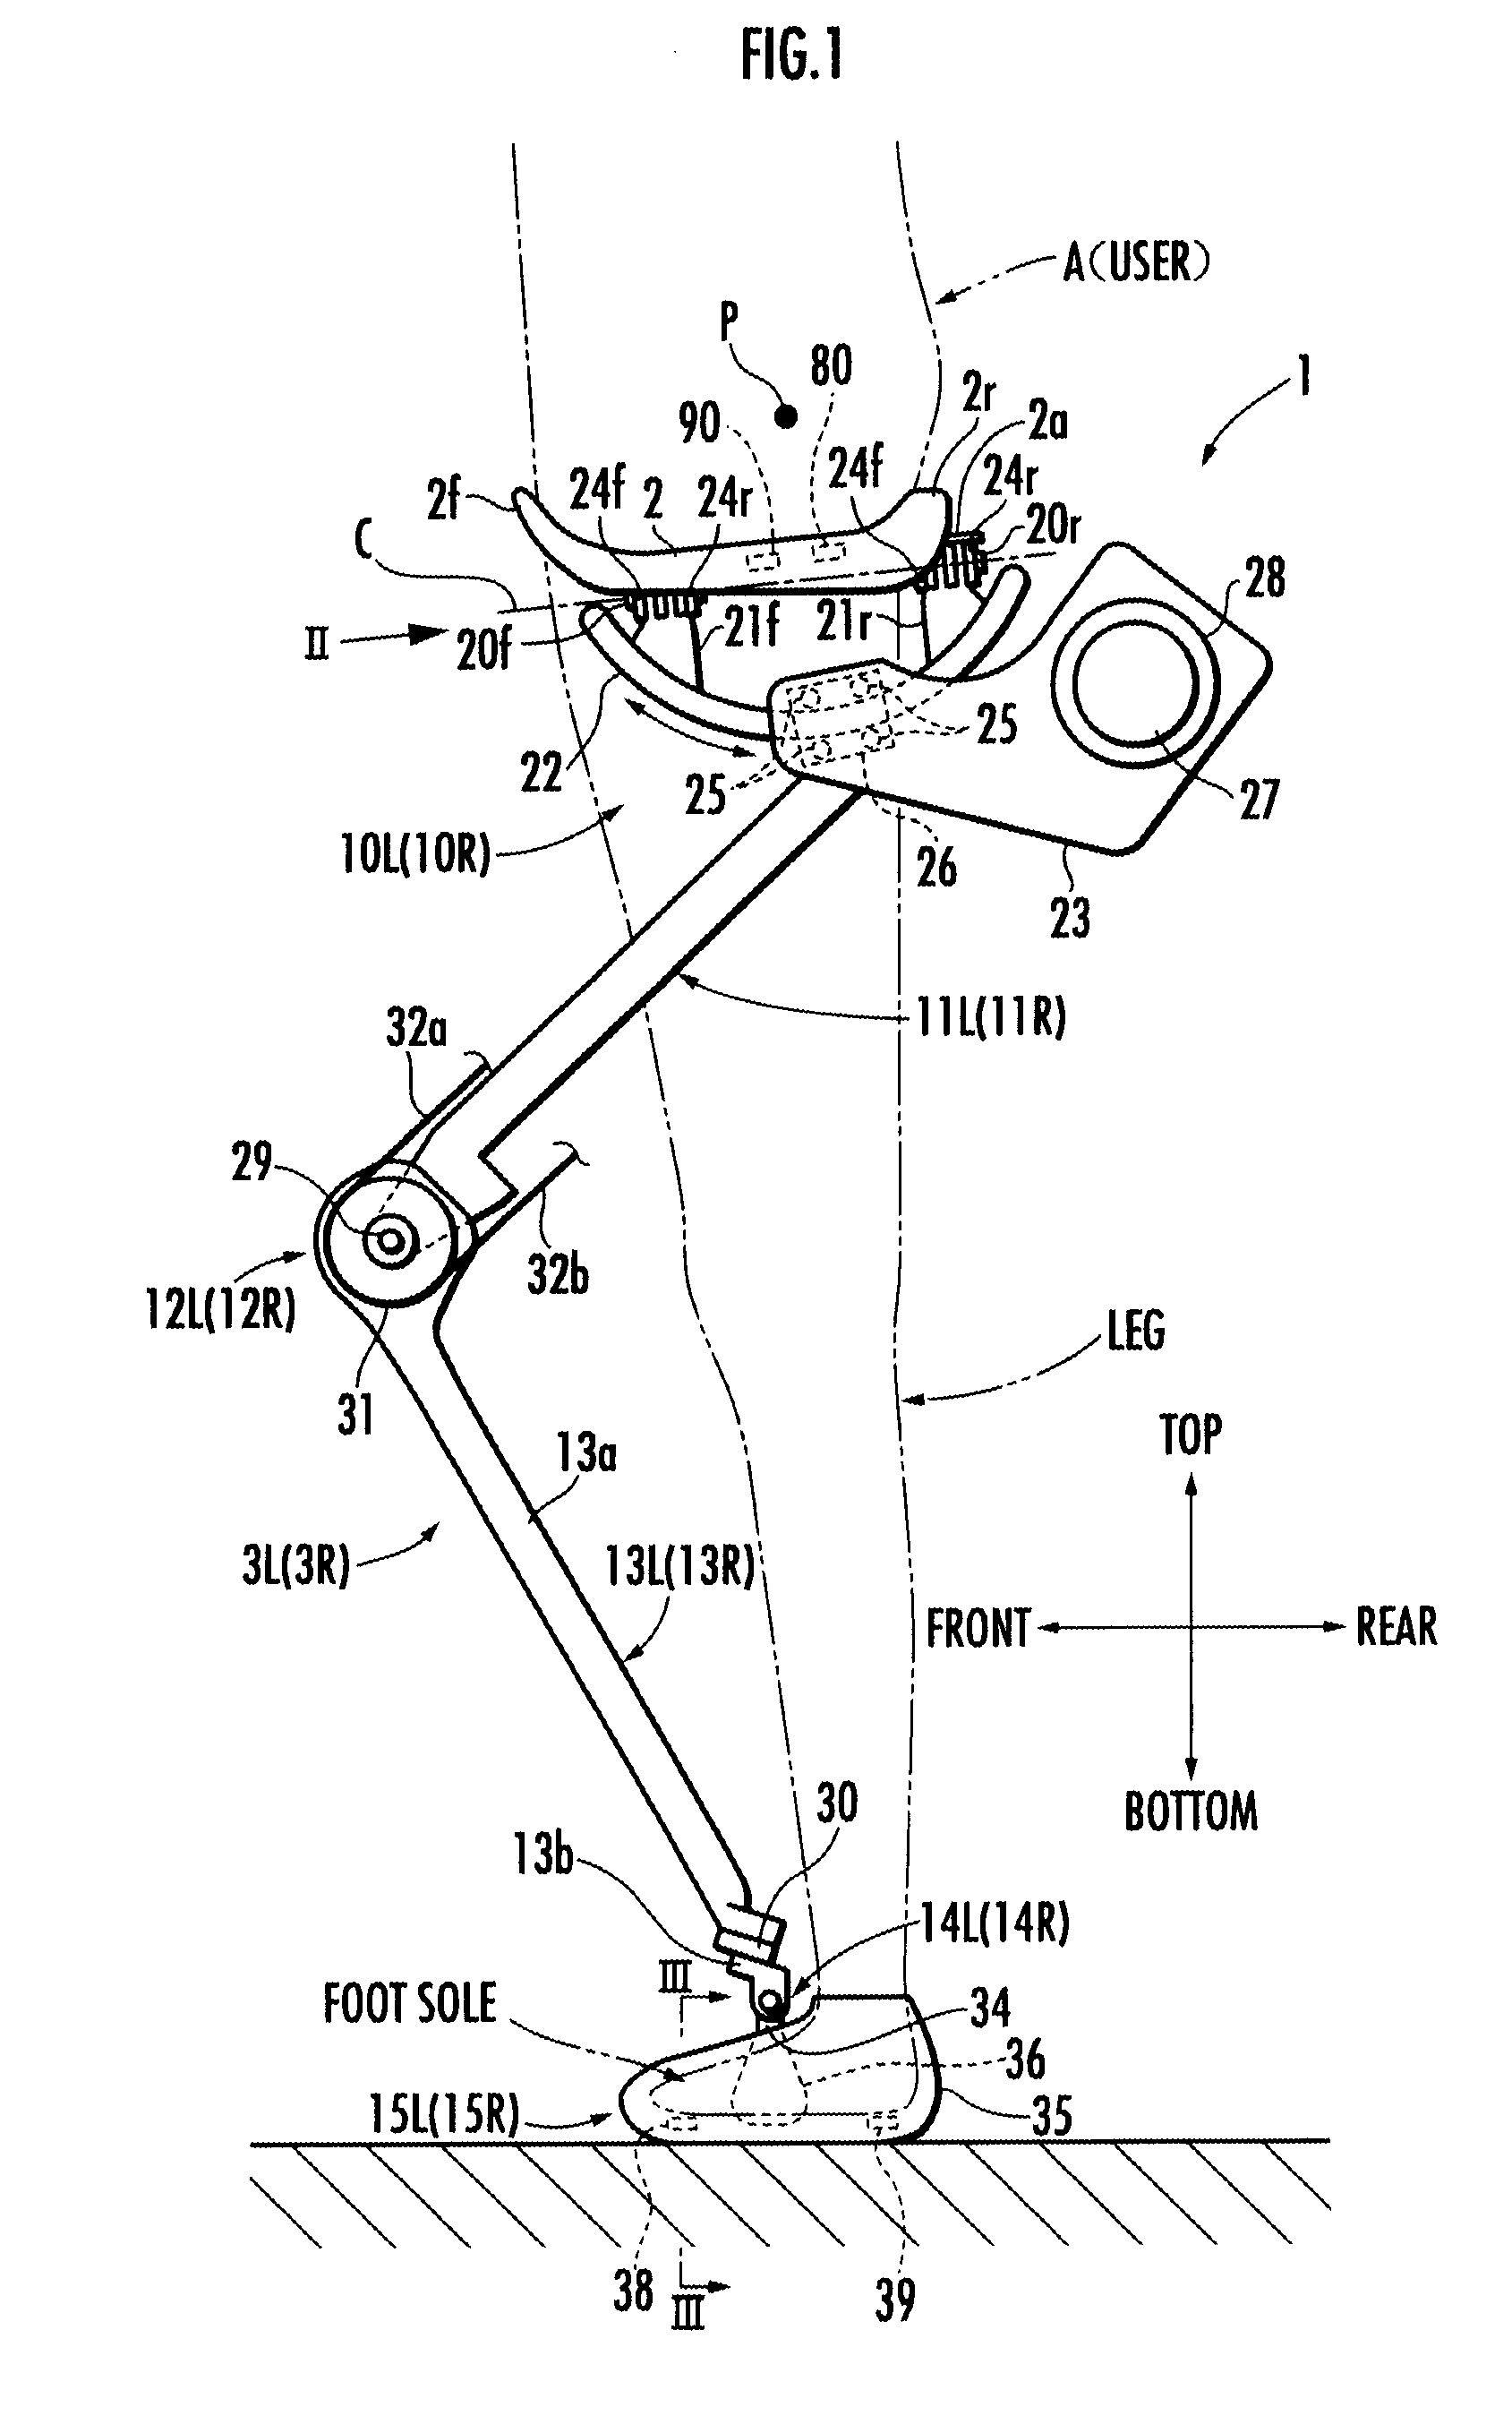 Control device for walking assistance device